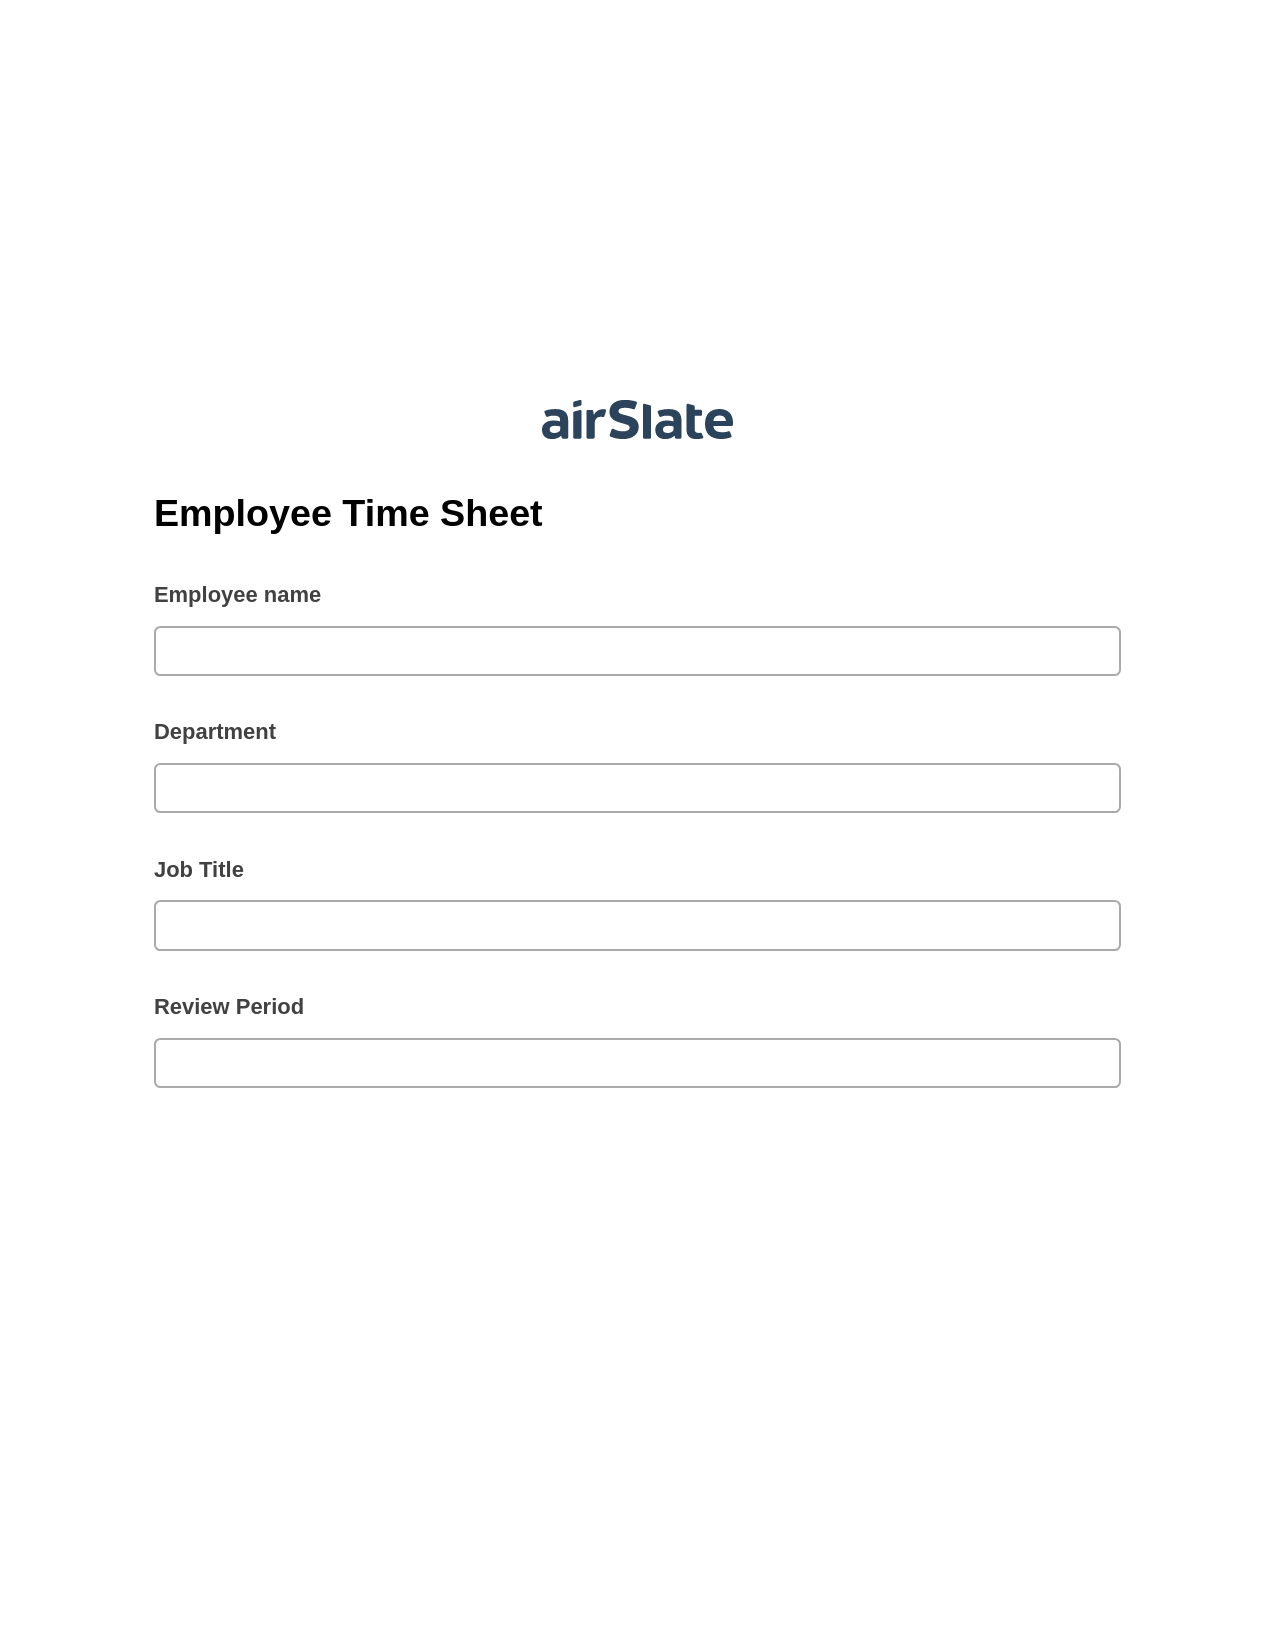 Multirole Employee Time Sheet Pre-fill from Salesforce Records with SOQL Bot, Create Salesforce Records Bot, Export to Google Sheet Bot